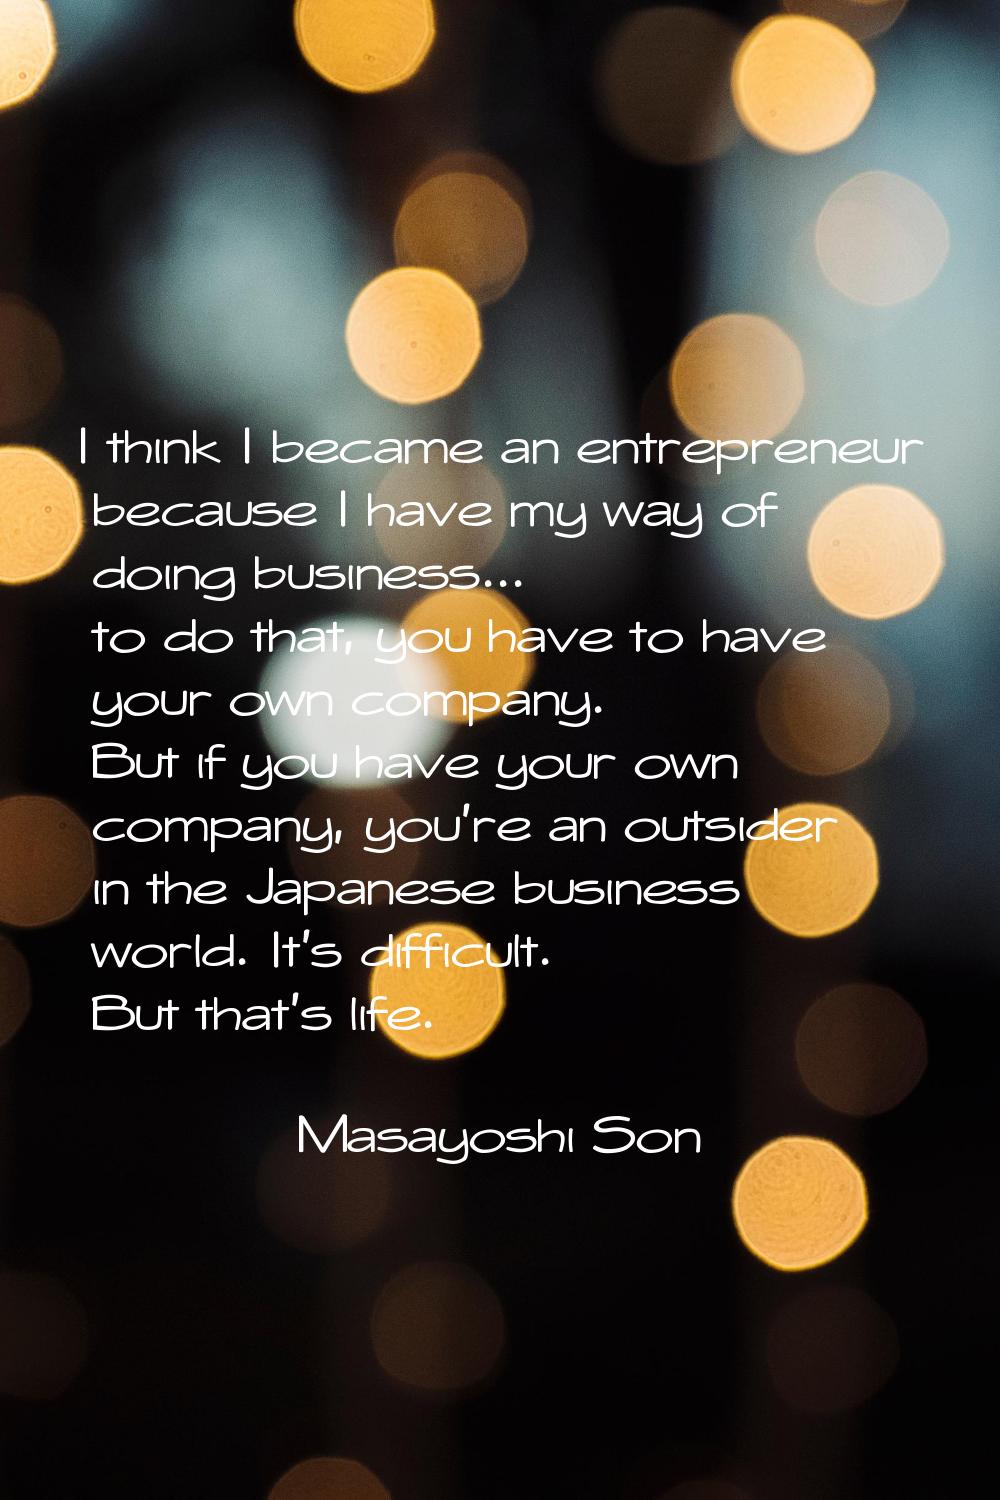 I think I became an entrepreneur because I have my way of doing business... to do that, you have to